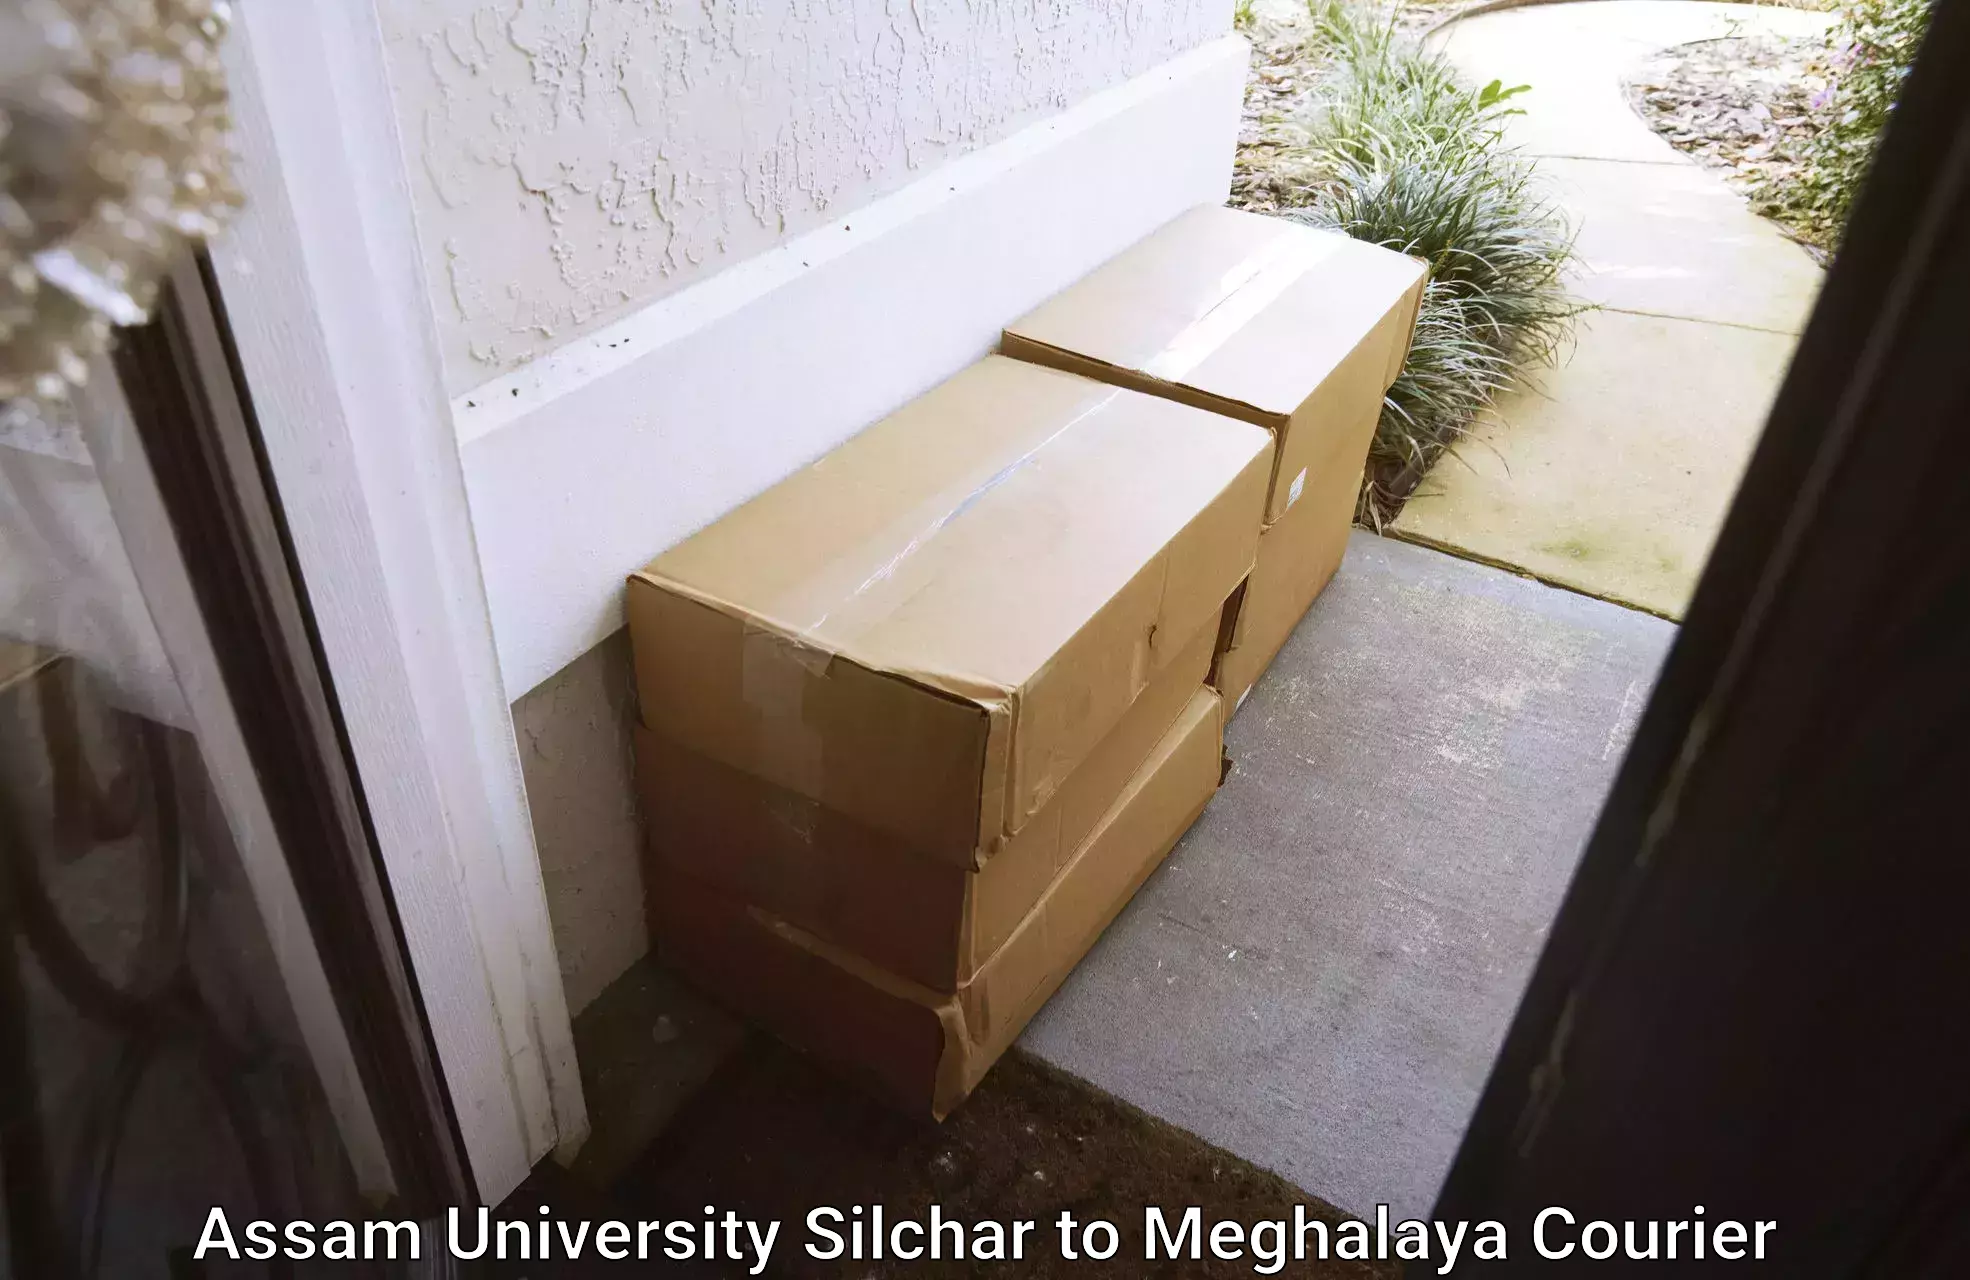 High-capacity courier solutions Assam University Silchar to Tura